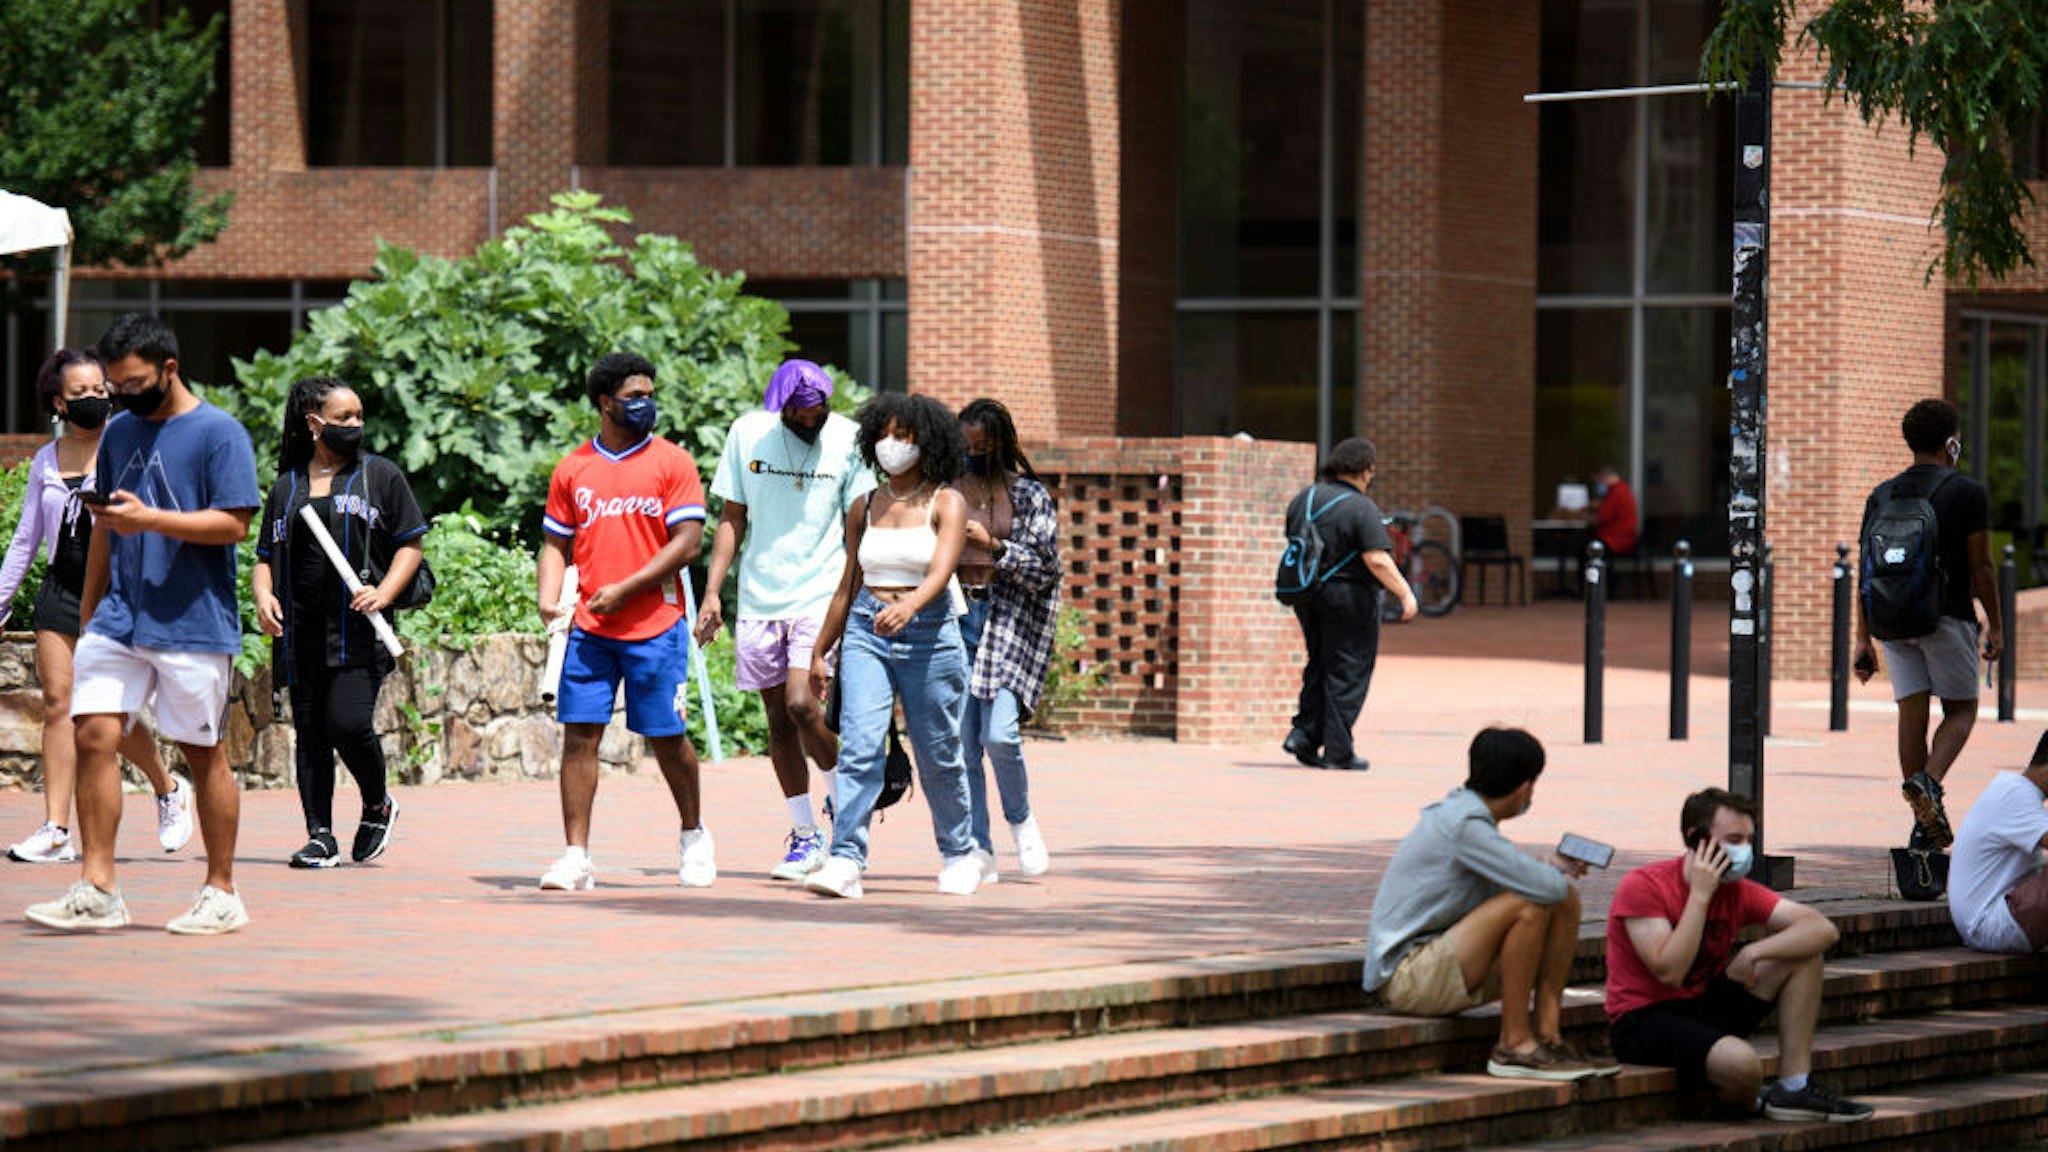 CHAPEL HILL, NC - AUGUST 18: Students walk through the campus of the University of North Carolina at Chapel Hill on August 18, 2020 in Chapel Hill, North Carolina.The school halted in-person classes and reverted back to online courses after a rise in the number of COVID-19 cases over the past week.